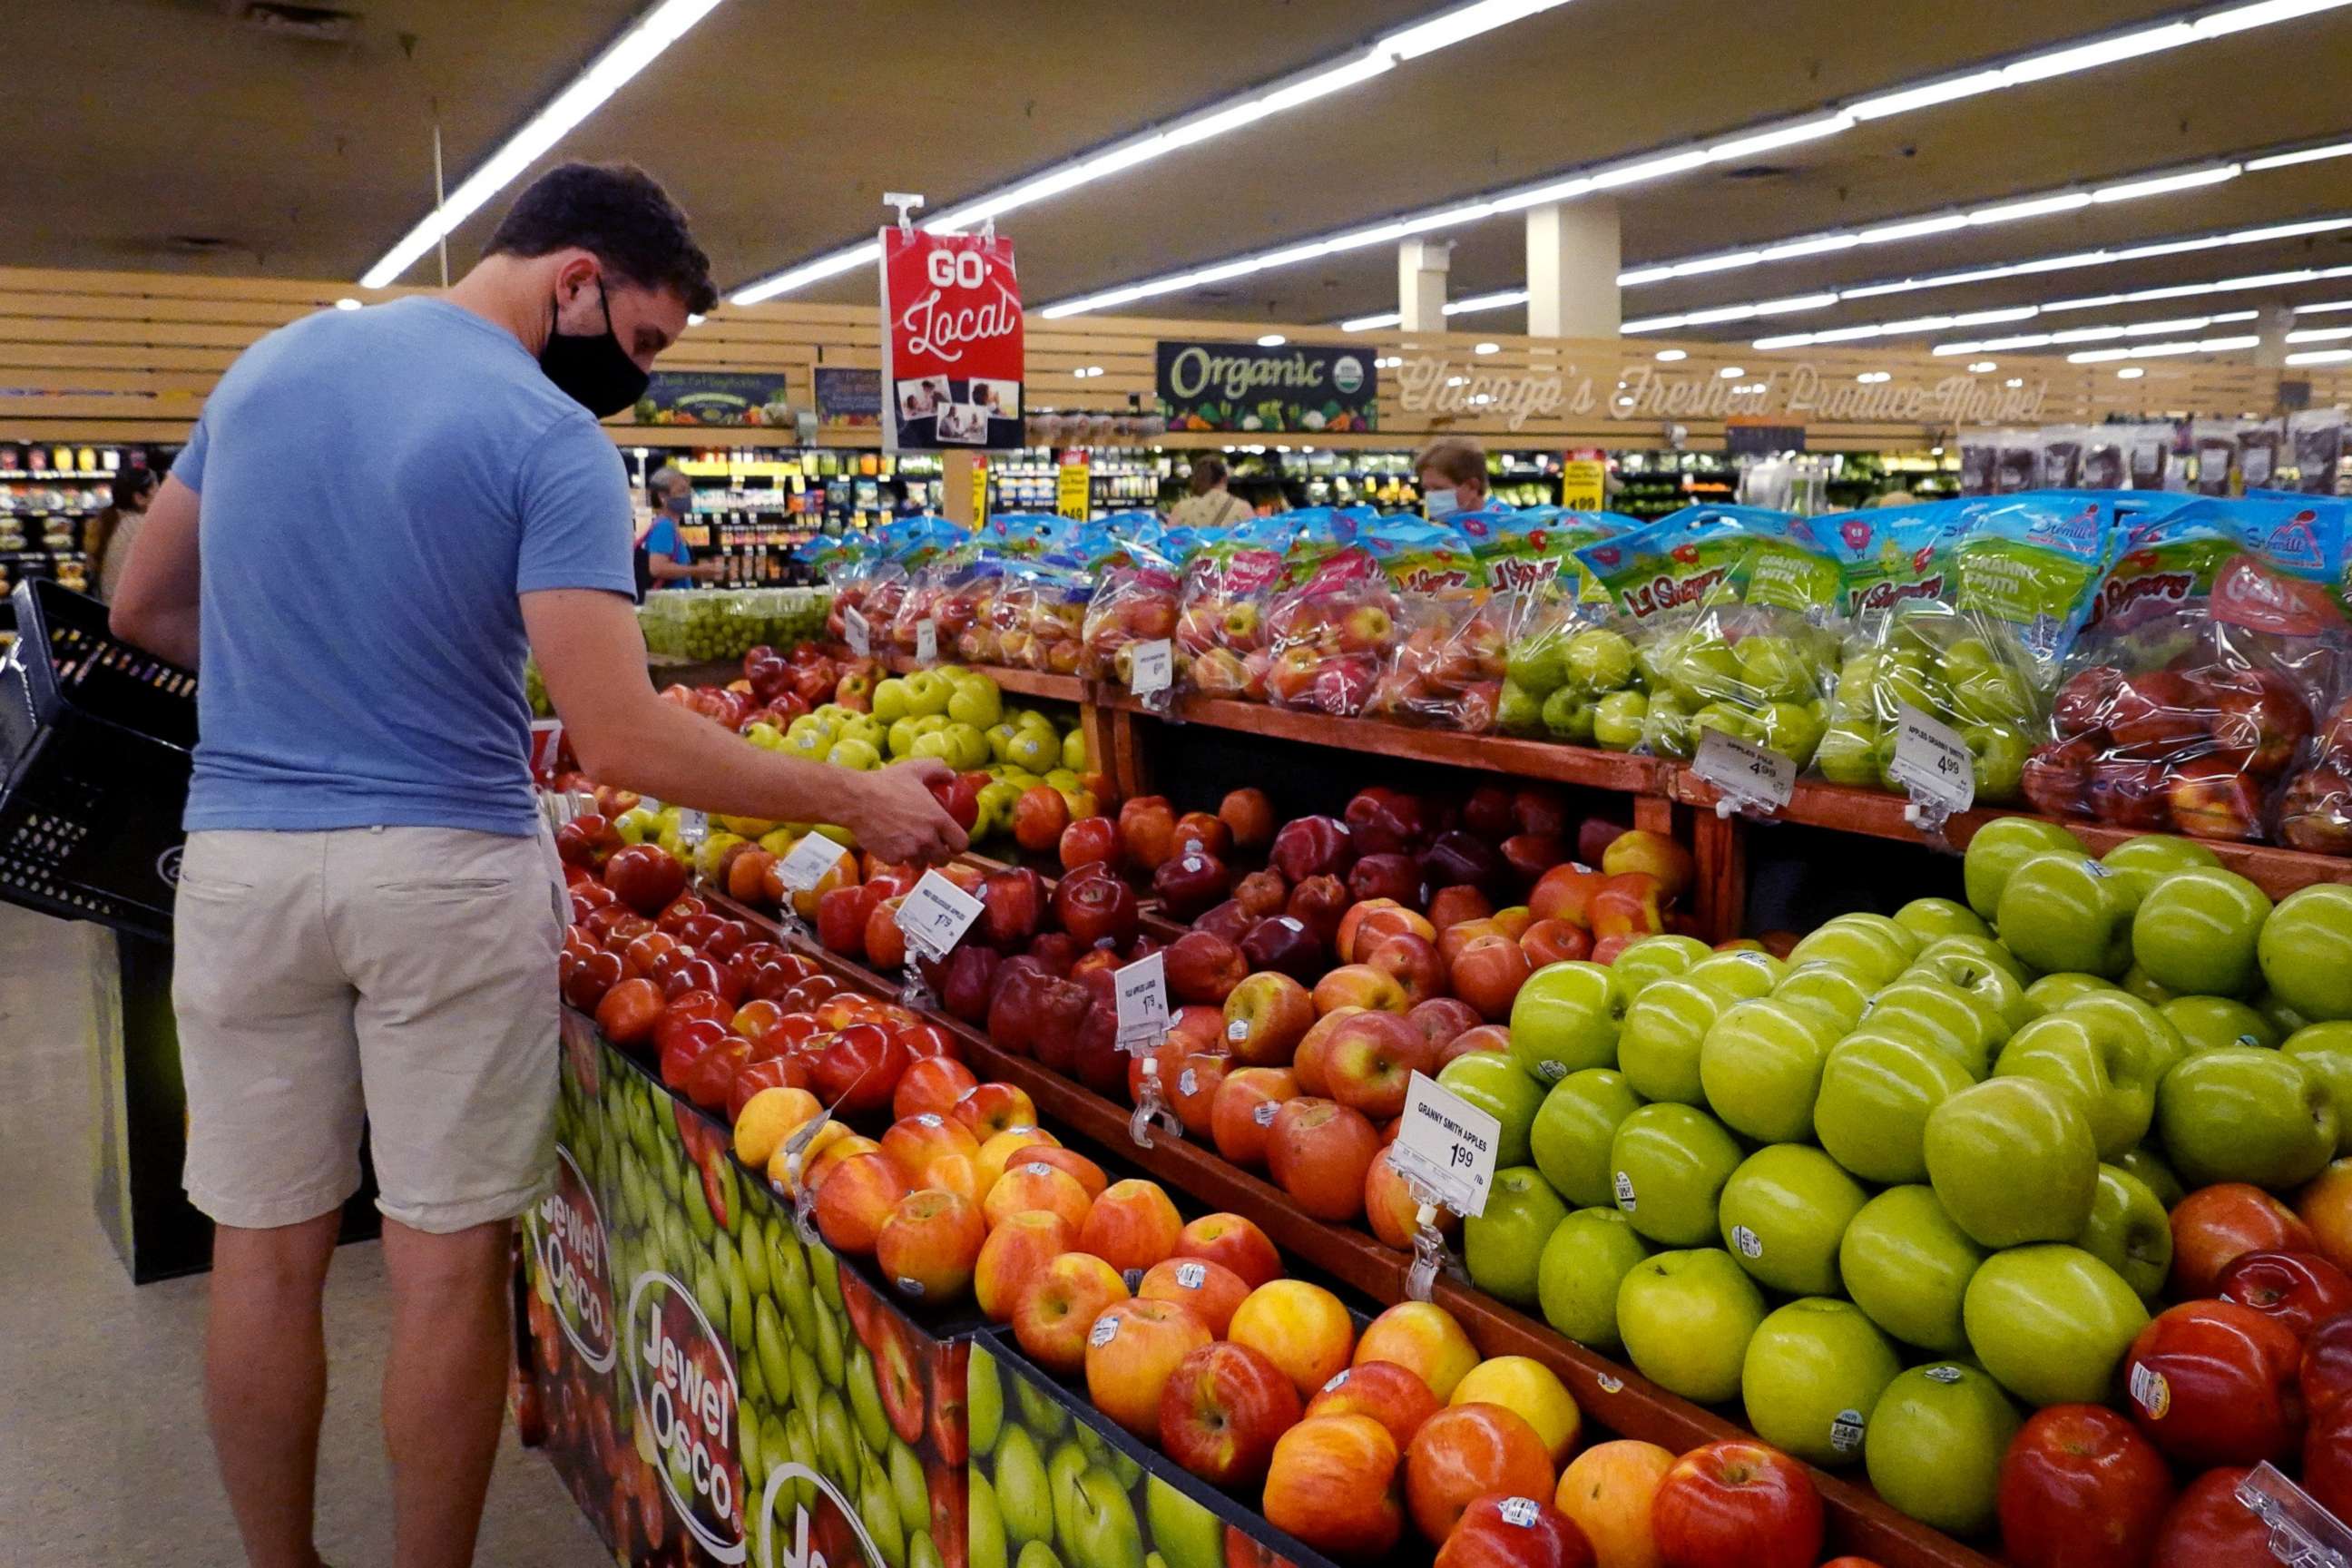 PHOTO: Customers shop for produce at a supermarket on June 10, 2021 in Chicago.